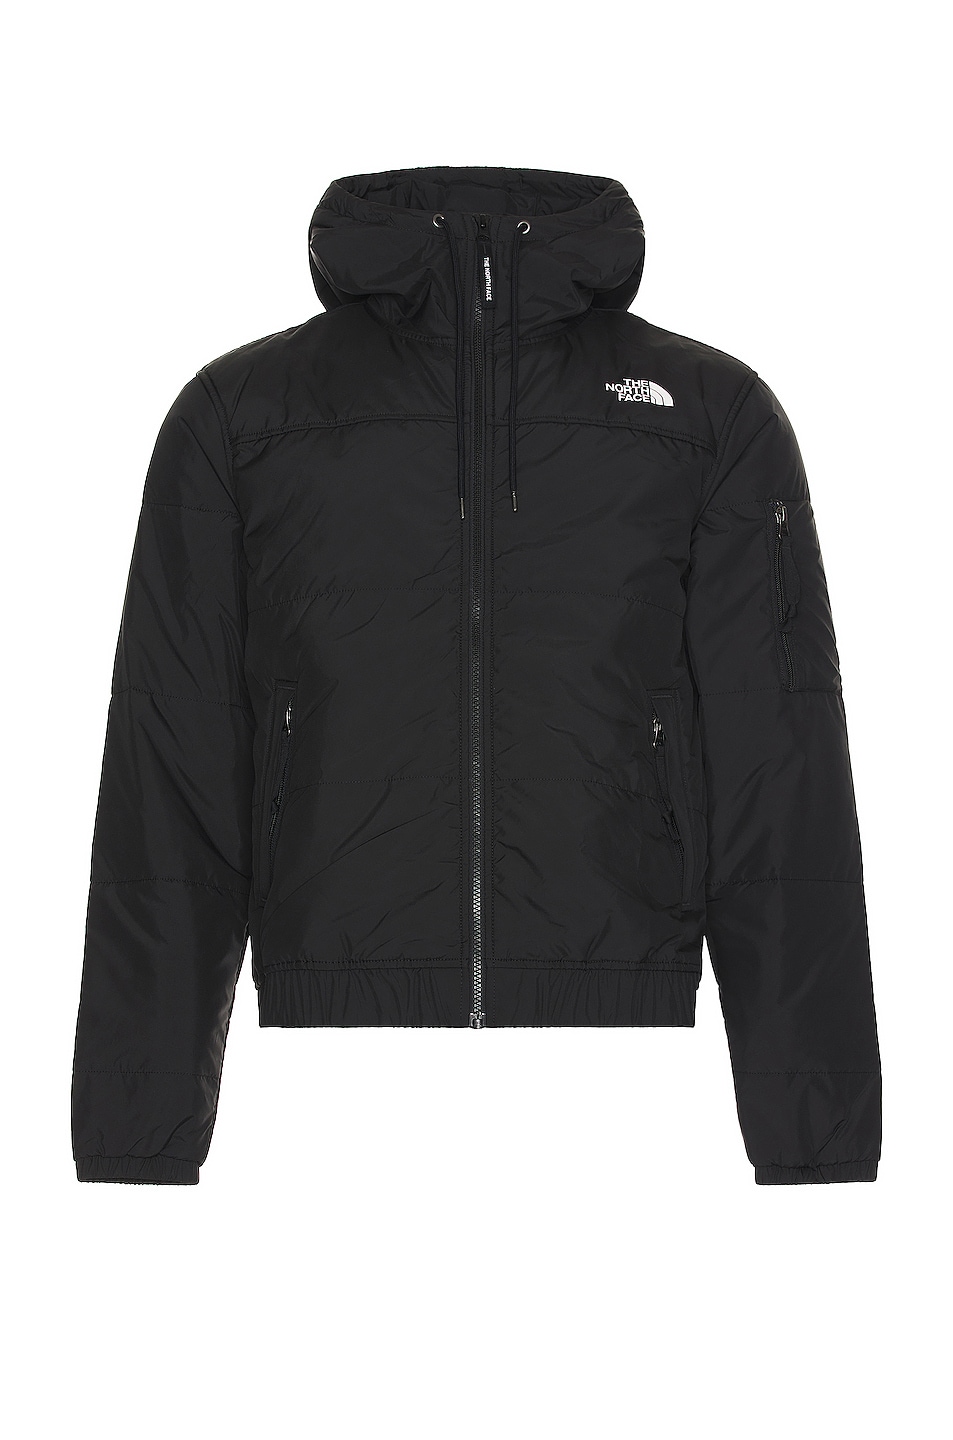 Image 1 of The North Face Highrail Bomber Jacket in TNF Black